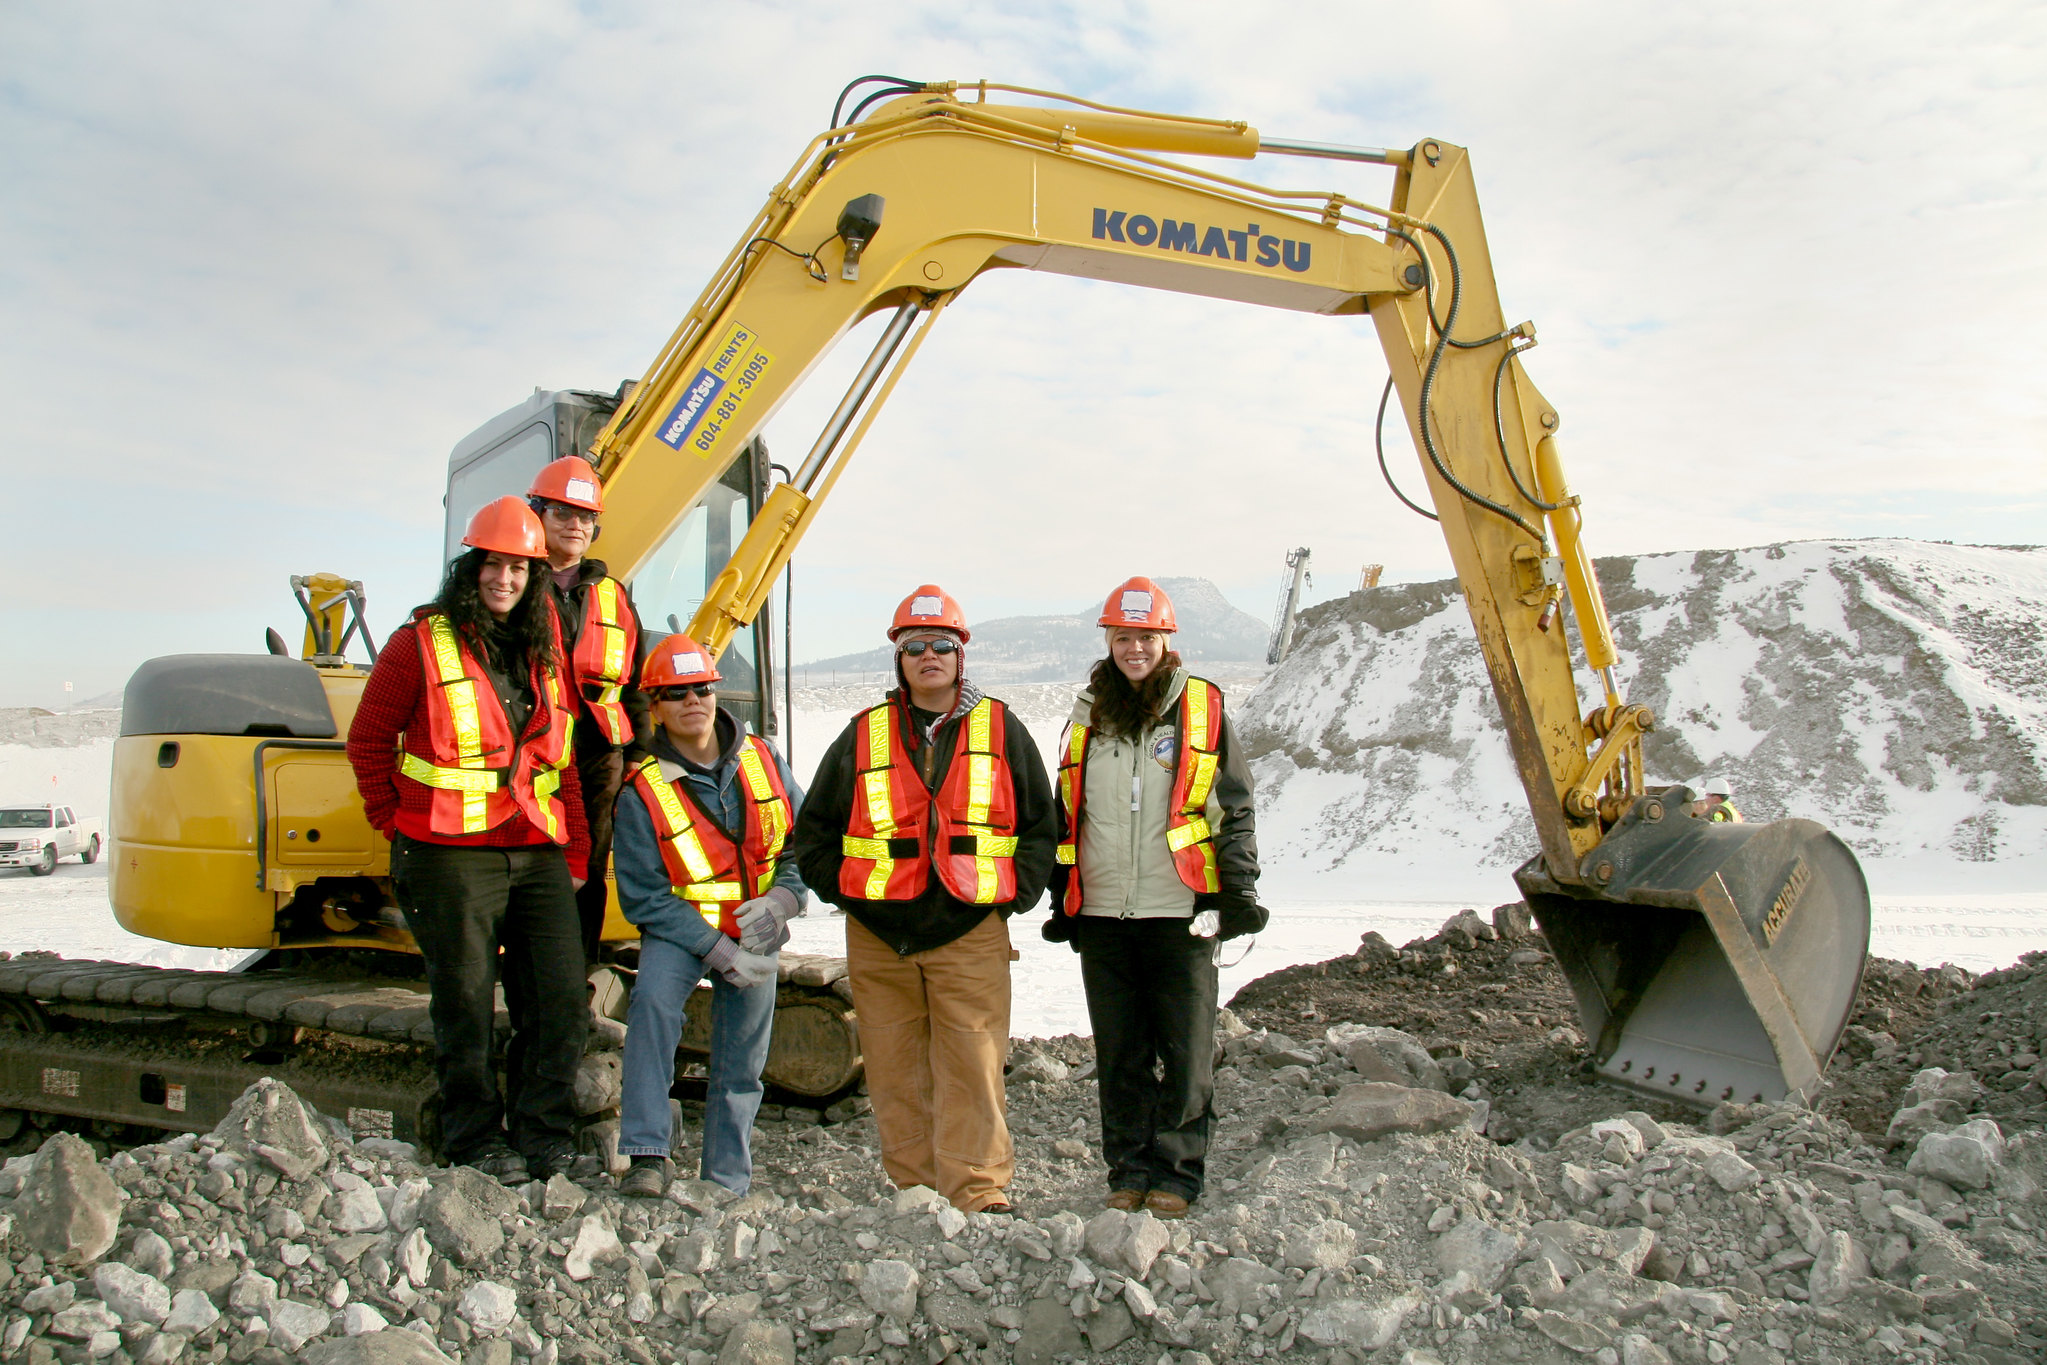 This photo shows five people in hard hats and safety vests in front of a front-end loader on a mining site in snowy landscape.